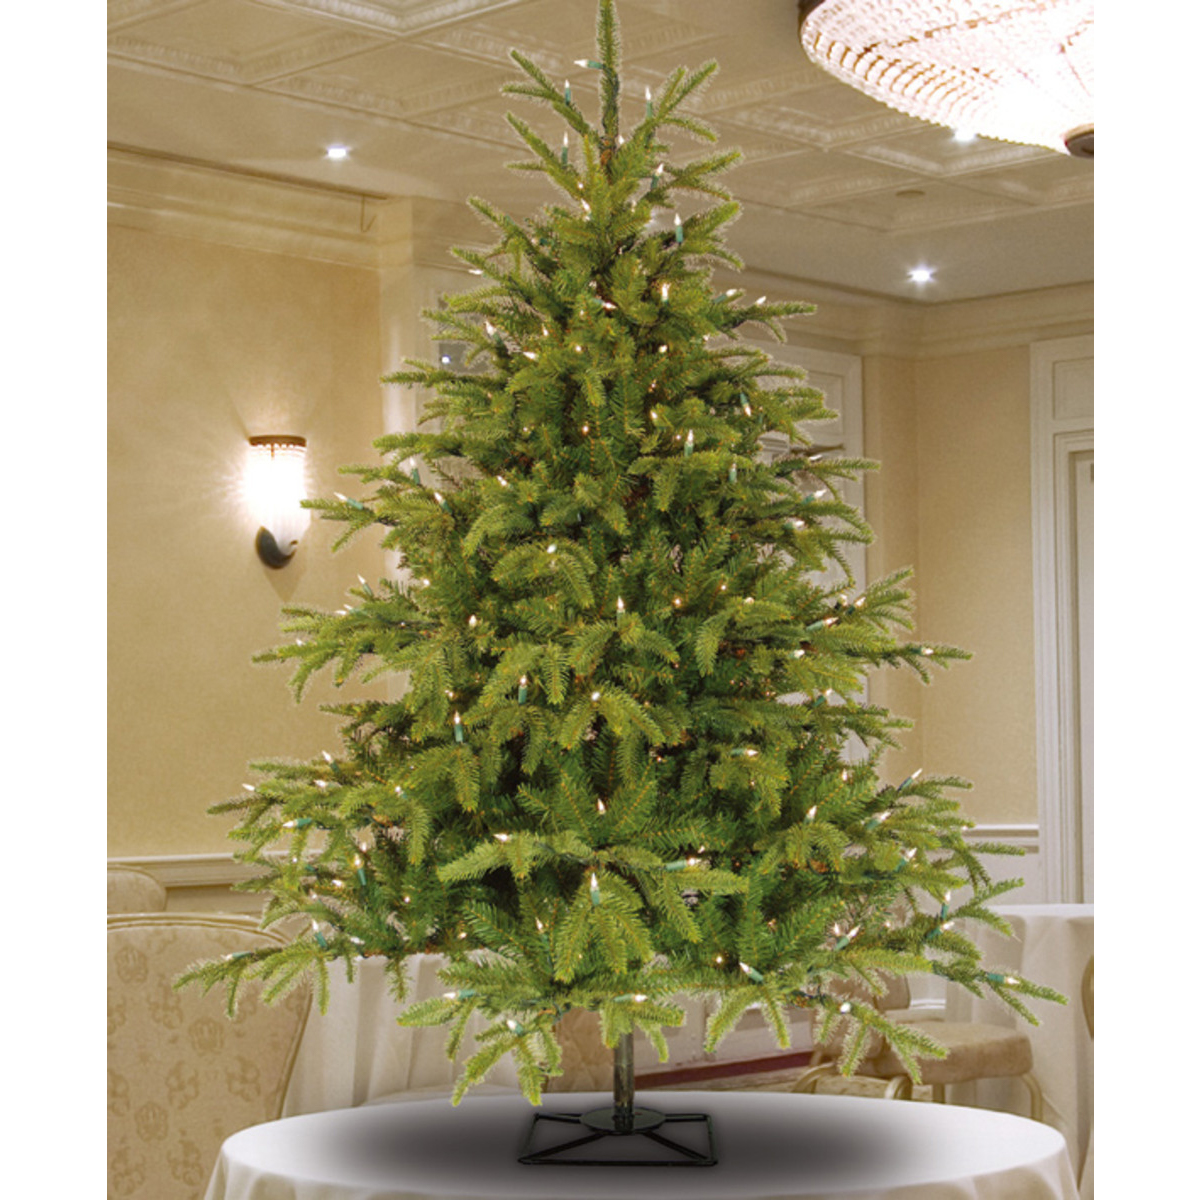 Alaskan Deluxe Christmas Tree - Warm White LED Glow Lights - 4.5ft Tall